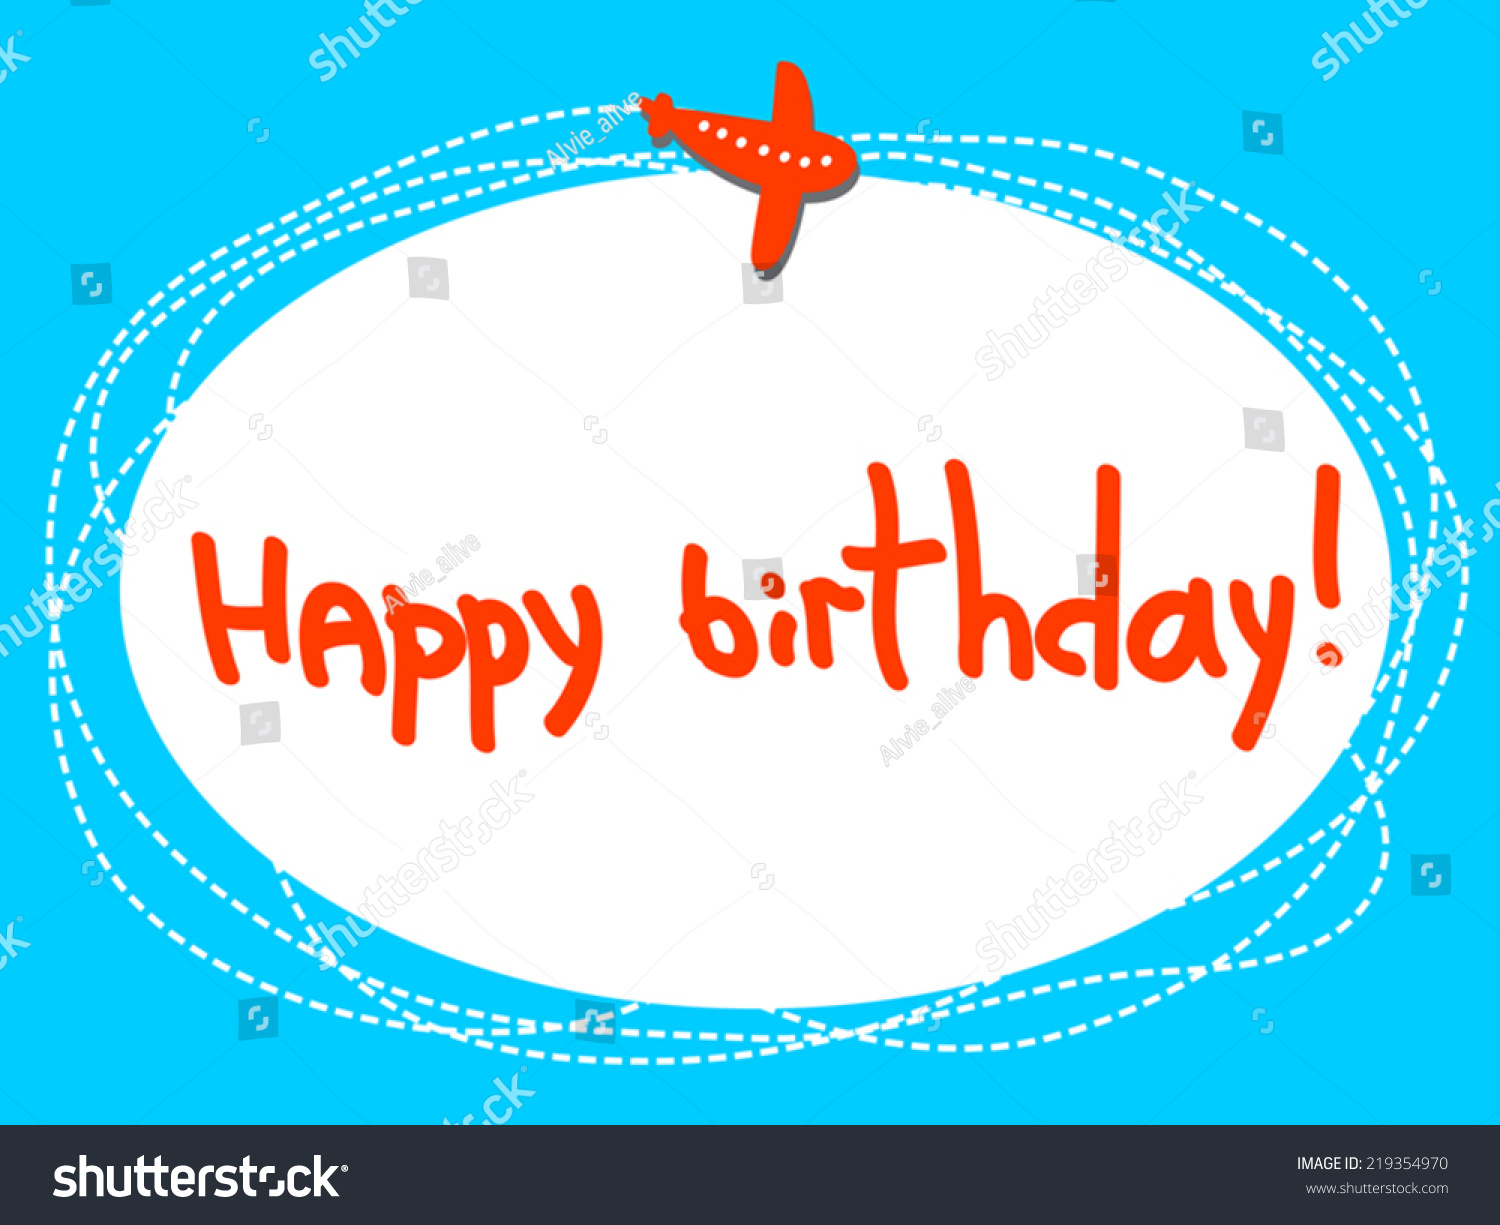 Download Happy Birthday Greeting Card Sky Travel Stock Vector ...